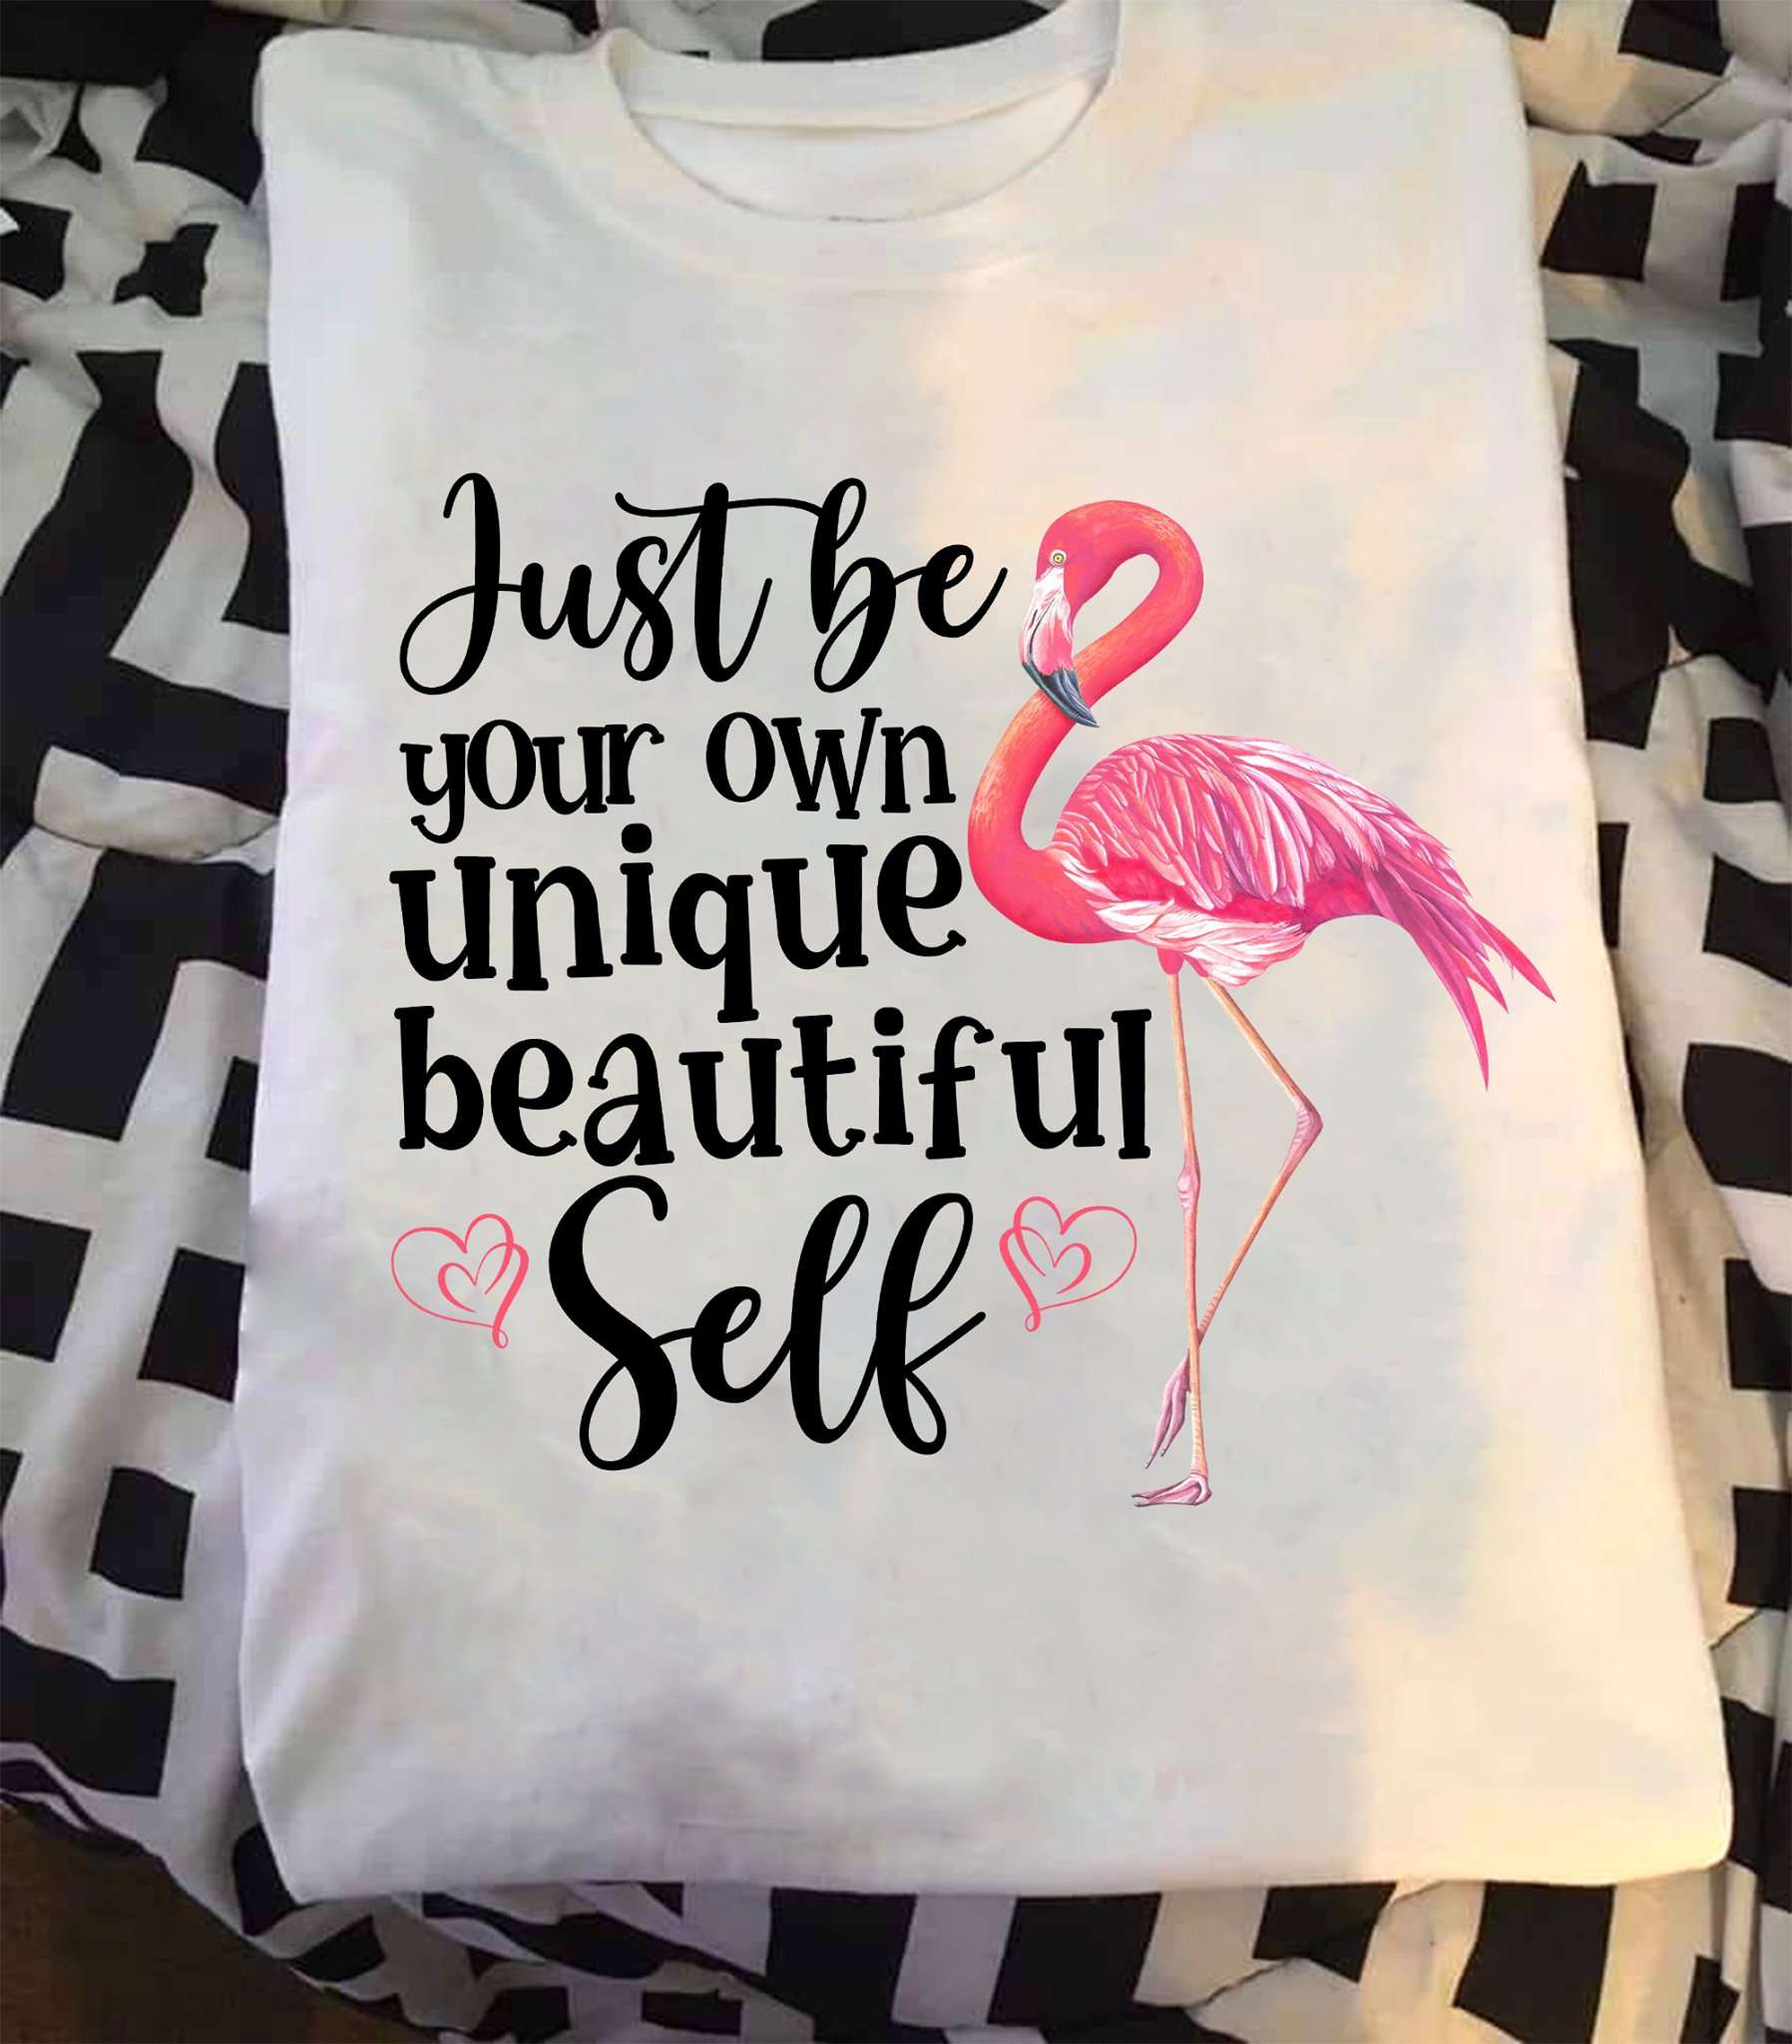 Just be your own unique beautiful self - Flamingo lover